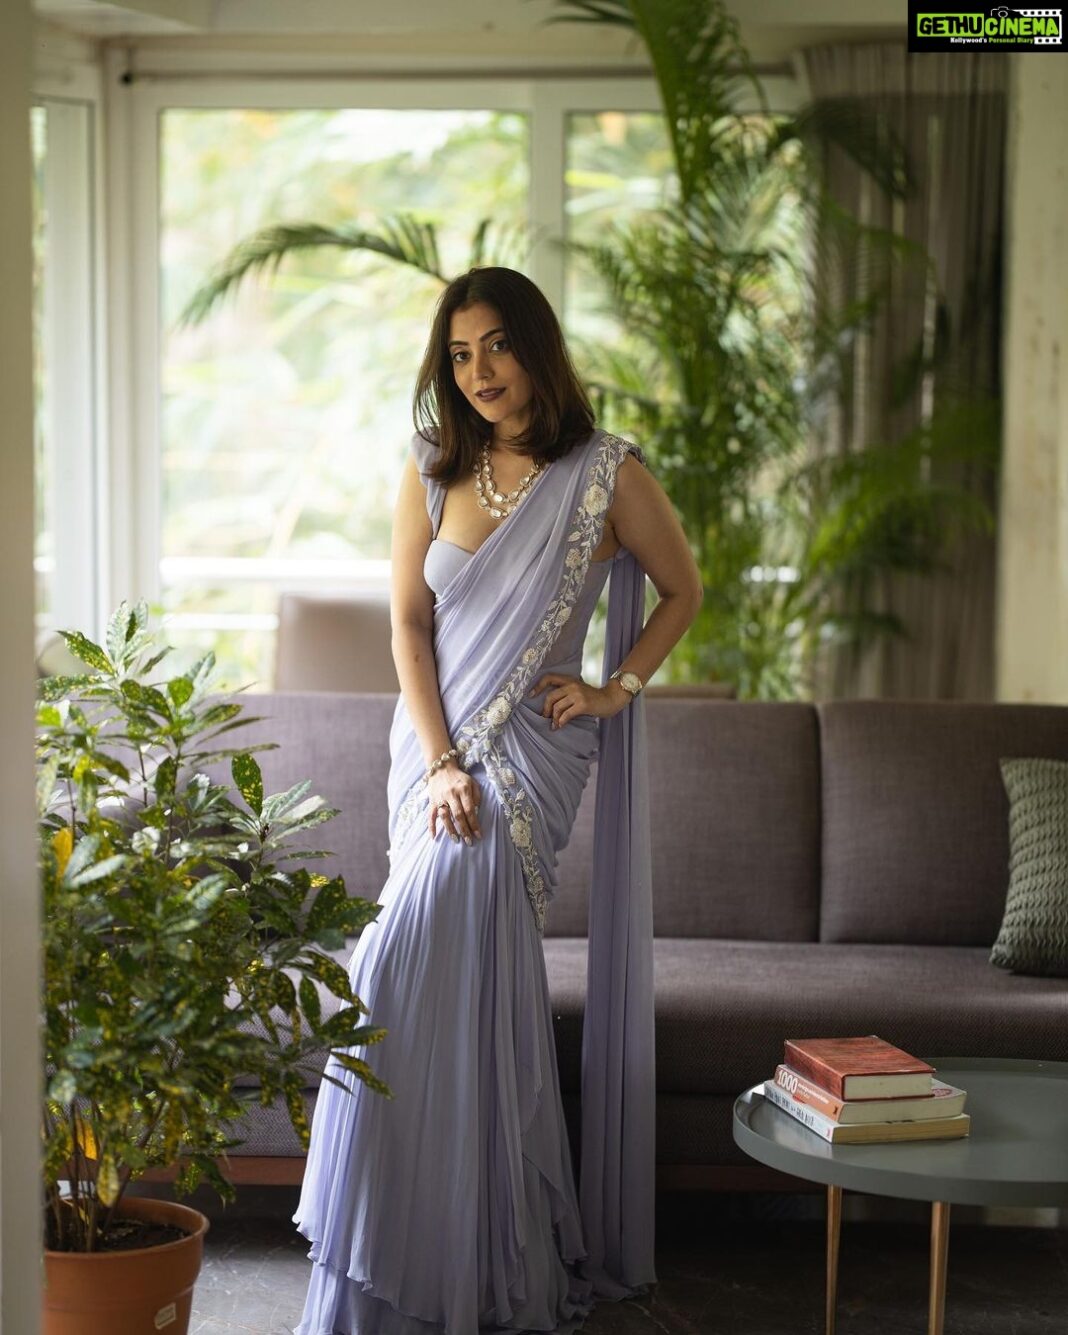 Nisha Agarwal Instagram - Wedding vibes ❤️ love love love this saree/saree gown from @shlokakhialaniofficial right from the ruffles, the ease of the predrape and the stunning color. The color happens to be the @pantone color of the year 2022 #periwinkle Swipe to see a detailed shot of the stunning jewelry all from @umraojewels Styled by @shikhadhandhia MUAH @khush.mua 📸 @piyush_tanpure #grwm #indianfestivewear #sareestyle #predrapedsaree #indiandesigners #weddingwearsarees